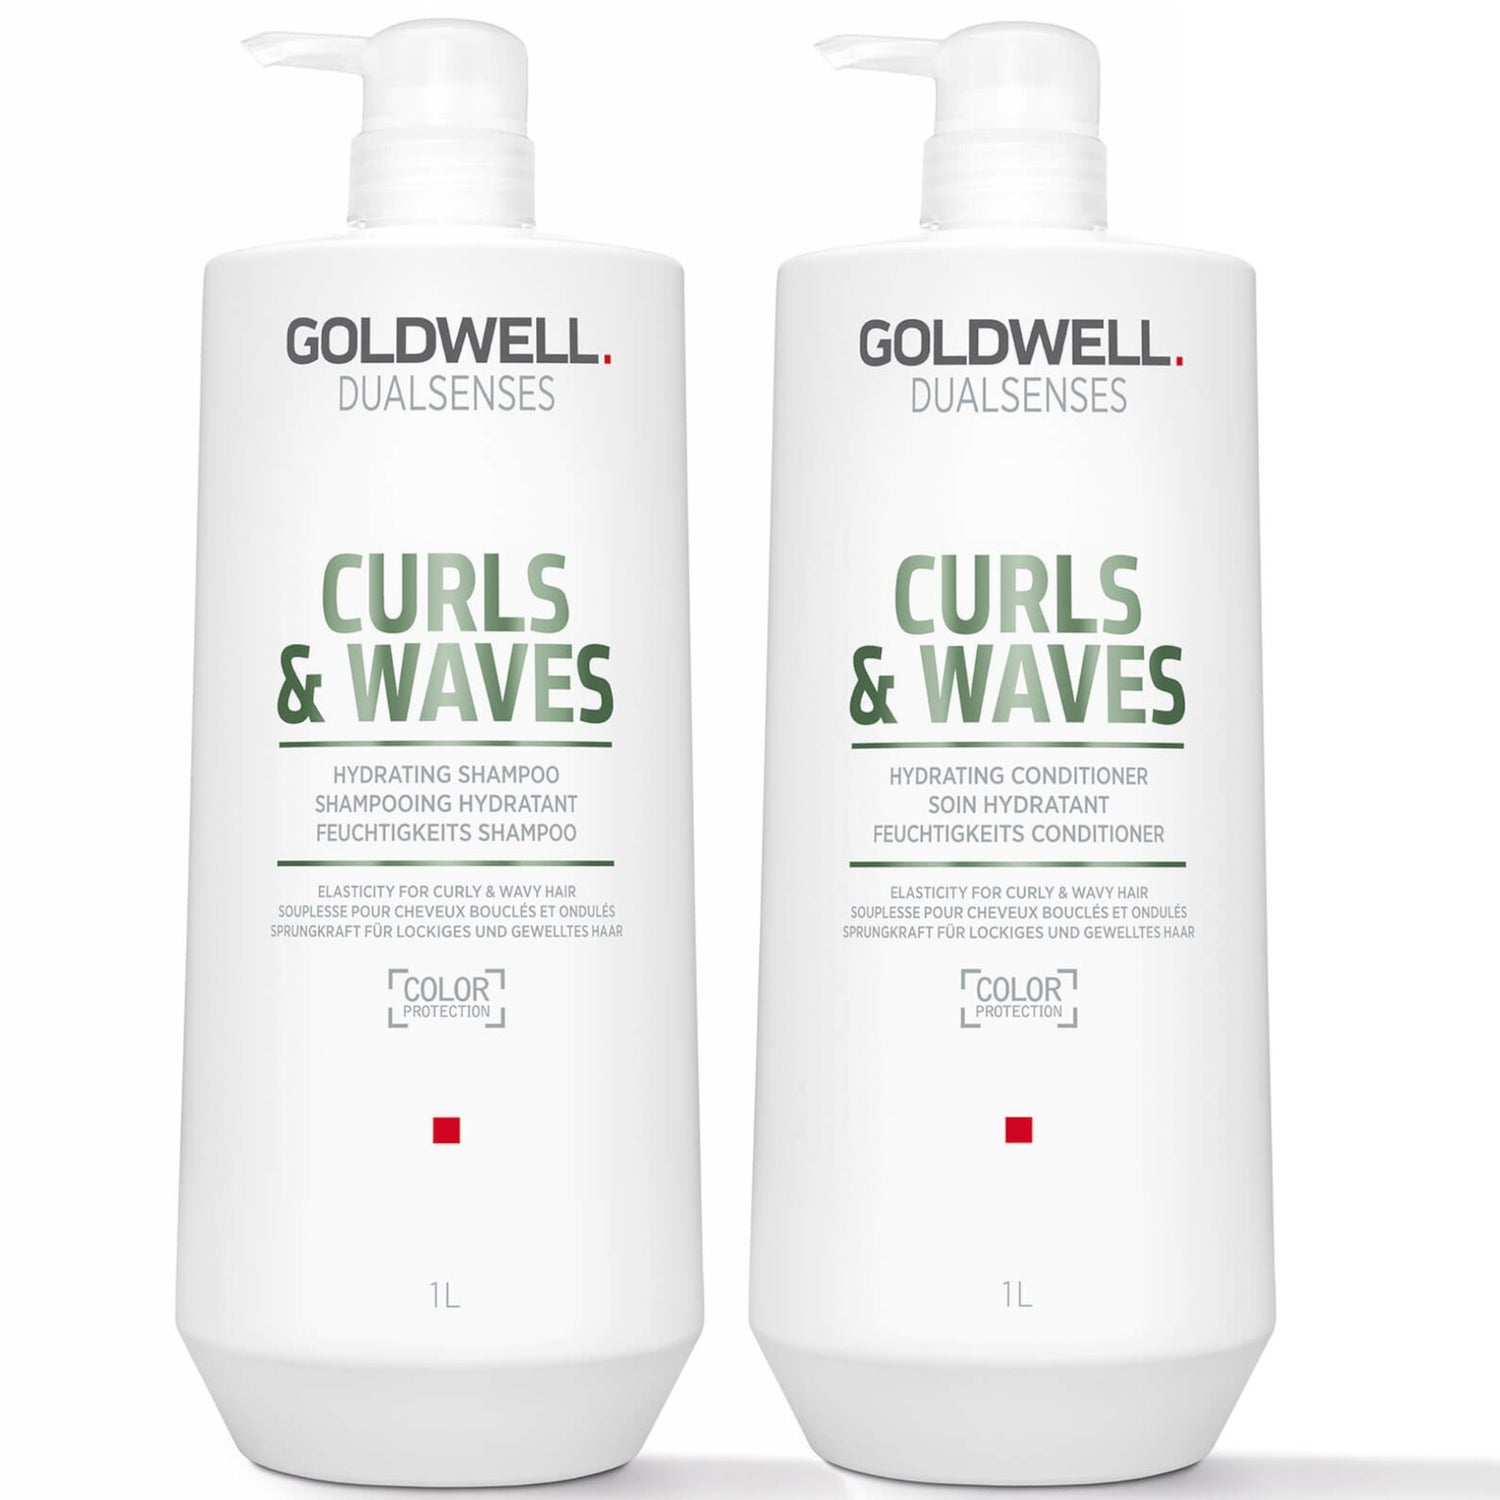 Goldwell Dualsenses Curls And Waves Hydrating Shampoo And Conditioner 1L Duo (Worth £101)